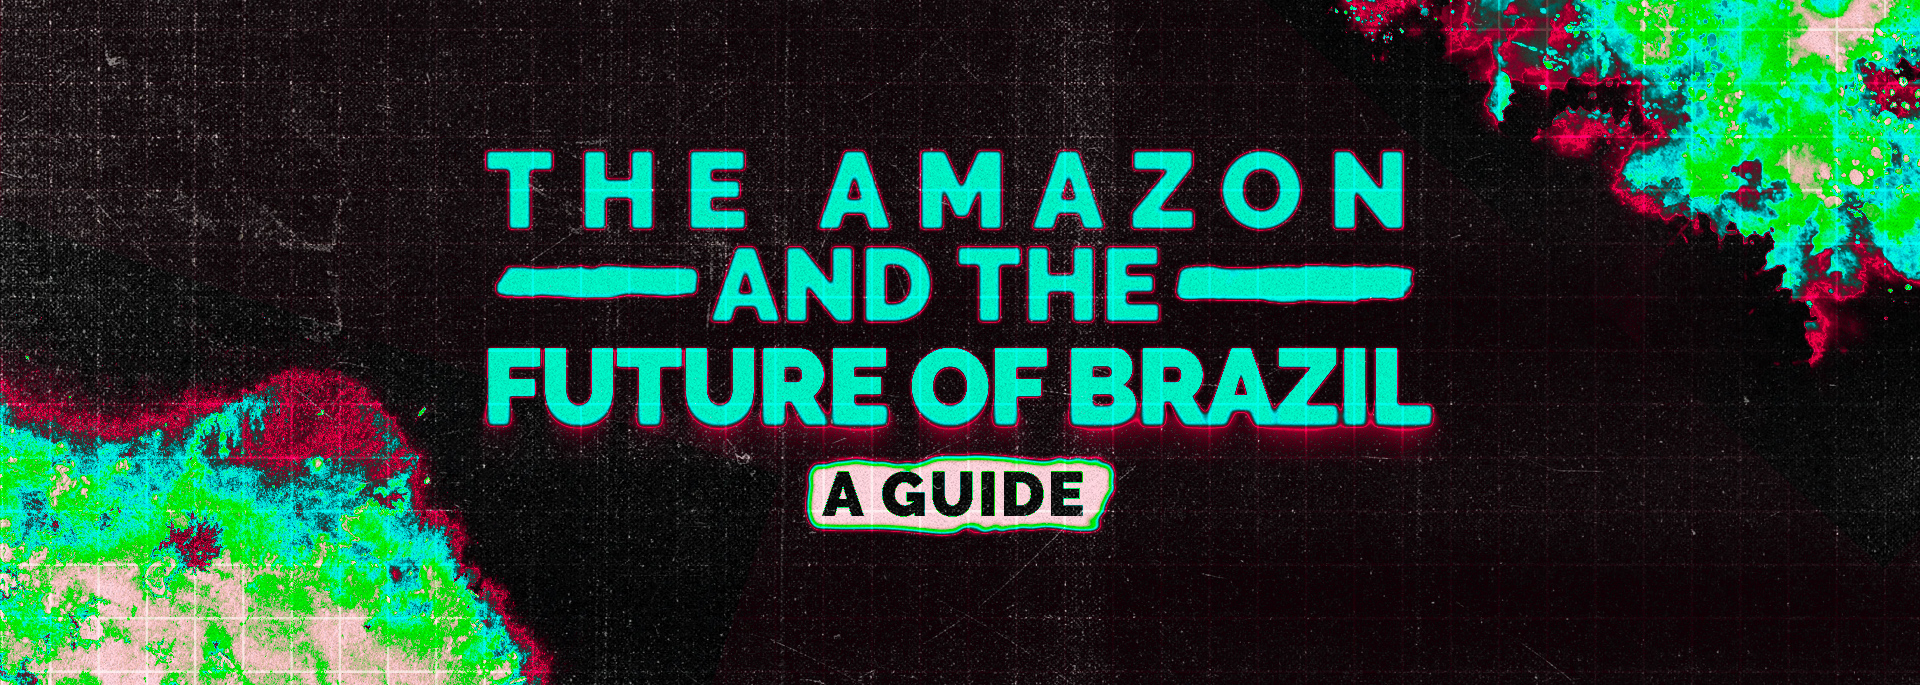 The Amazon and the Future of Brazil: a guide - An examination of the region's nine states between 2018 and 2022